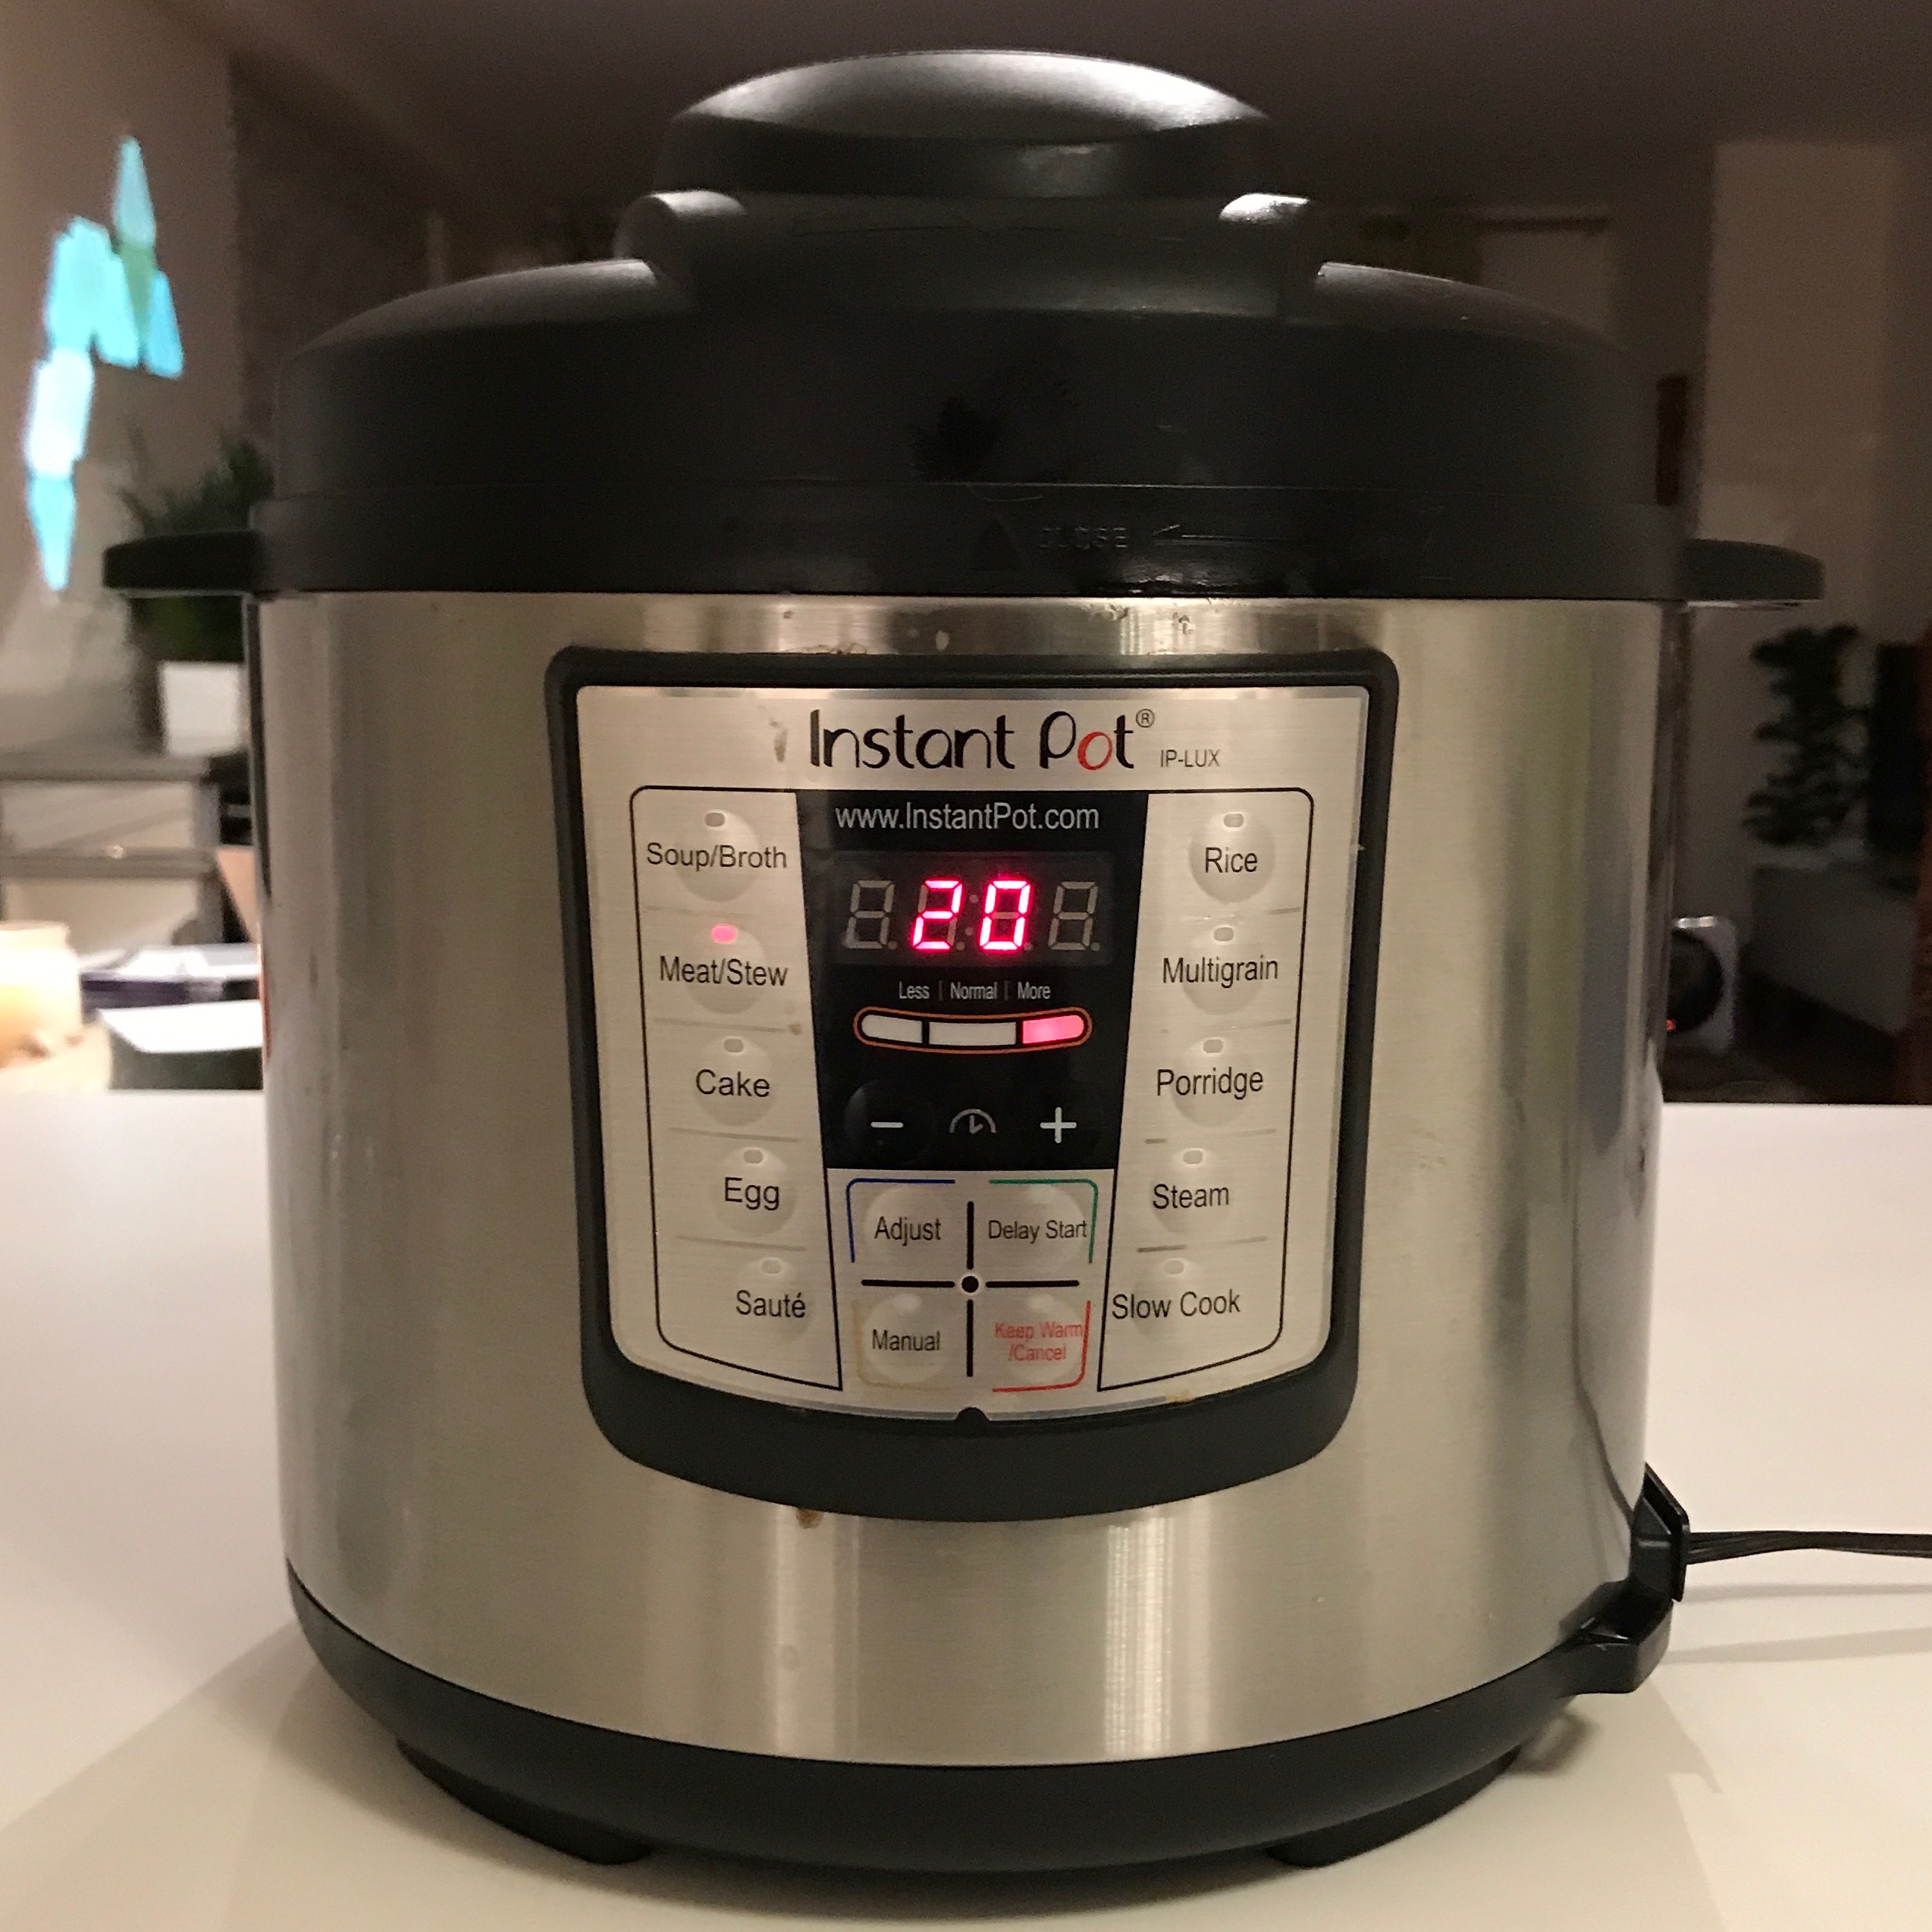 Instant Pot: A human-use experience analysis